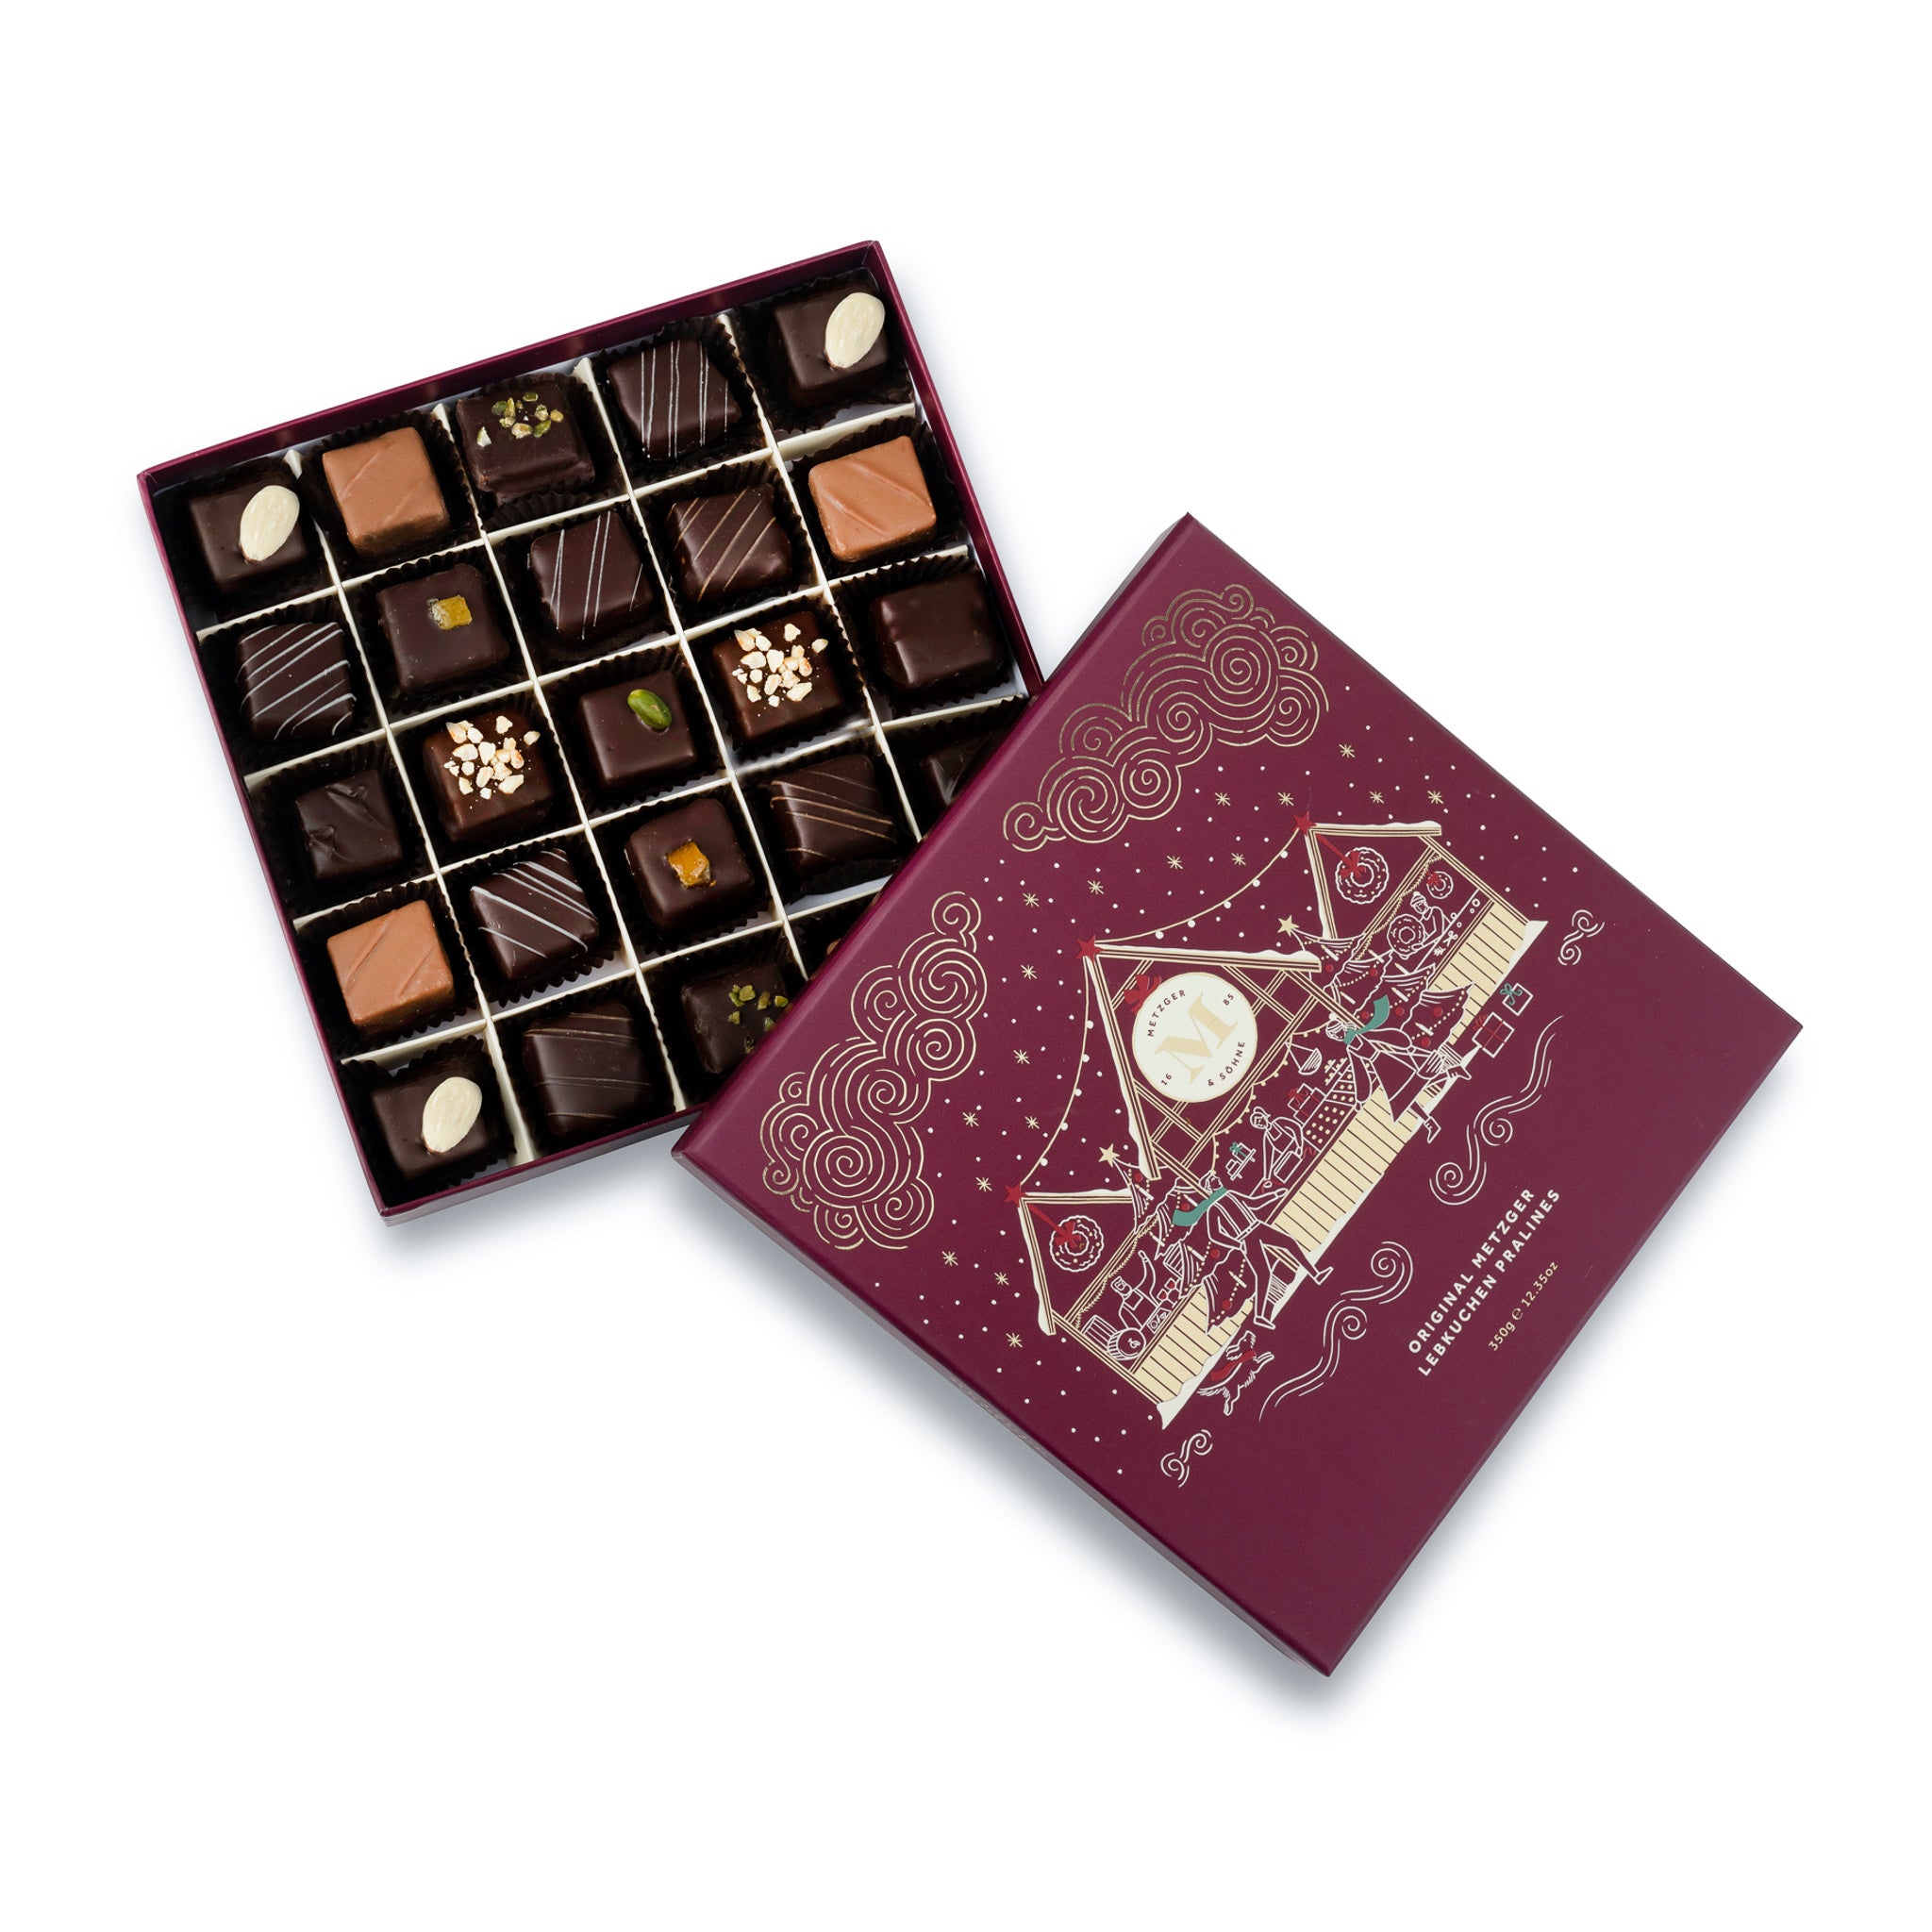 Metzger is pleased to bring you the magic of Viennese Christmas markets with a luxury chocolate box in bordeaux red, filled with 25 delectable Lebkuchen pralines. Each praline is layered with Lebkuchen 'honey cake' and filled with marzipan, nuts or fruit jams and jellies, encased in rich chocolate. Vegetarian friendly.